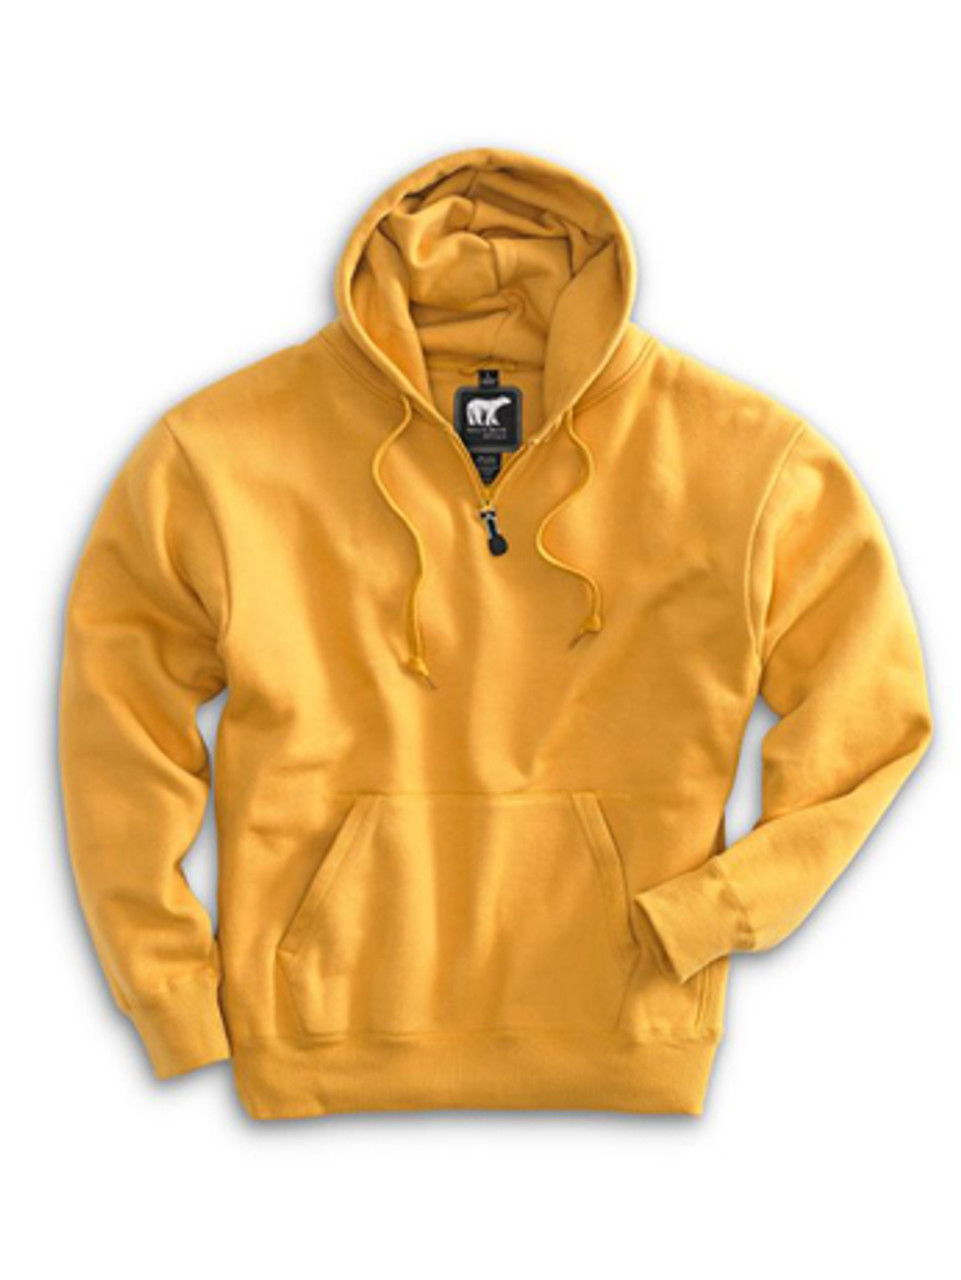 1000: Heavyweight Hoody by White Bear™ Clothing Co. in Sawdust